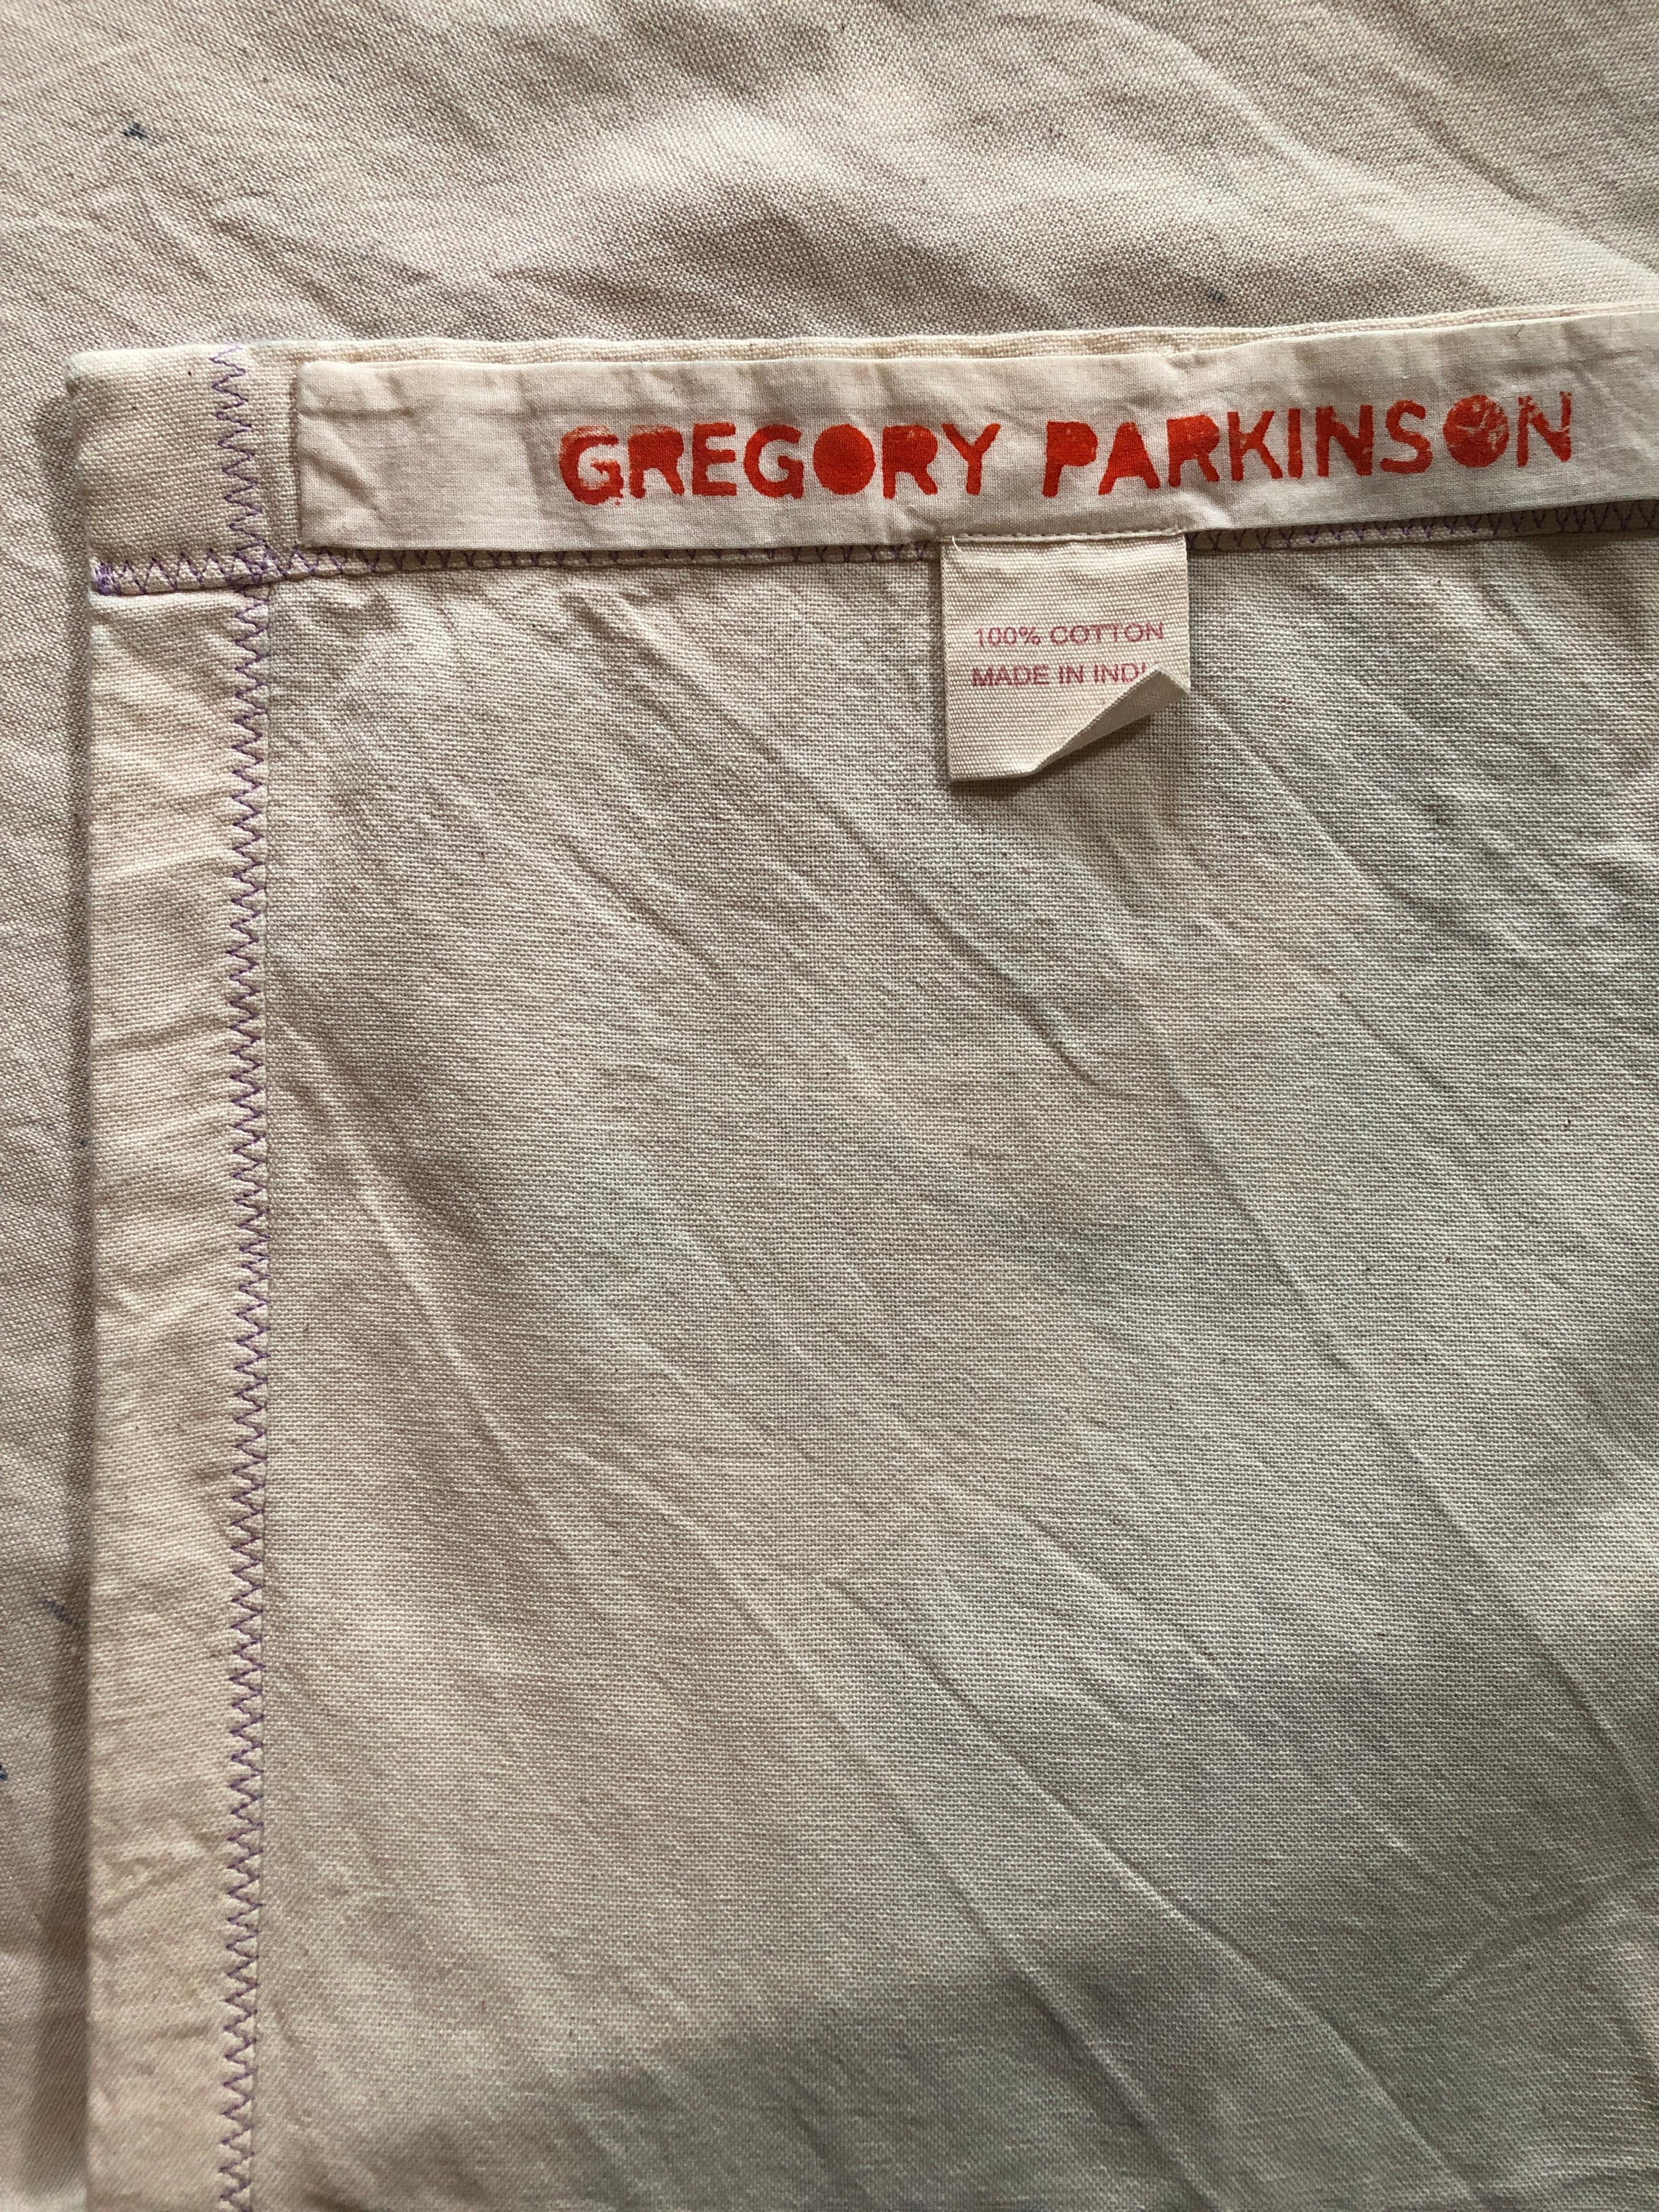 North American Contemporary Gregory Parkinson Tablecloth with White Ikat Hand-Blocked Patterns